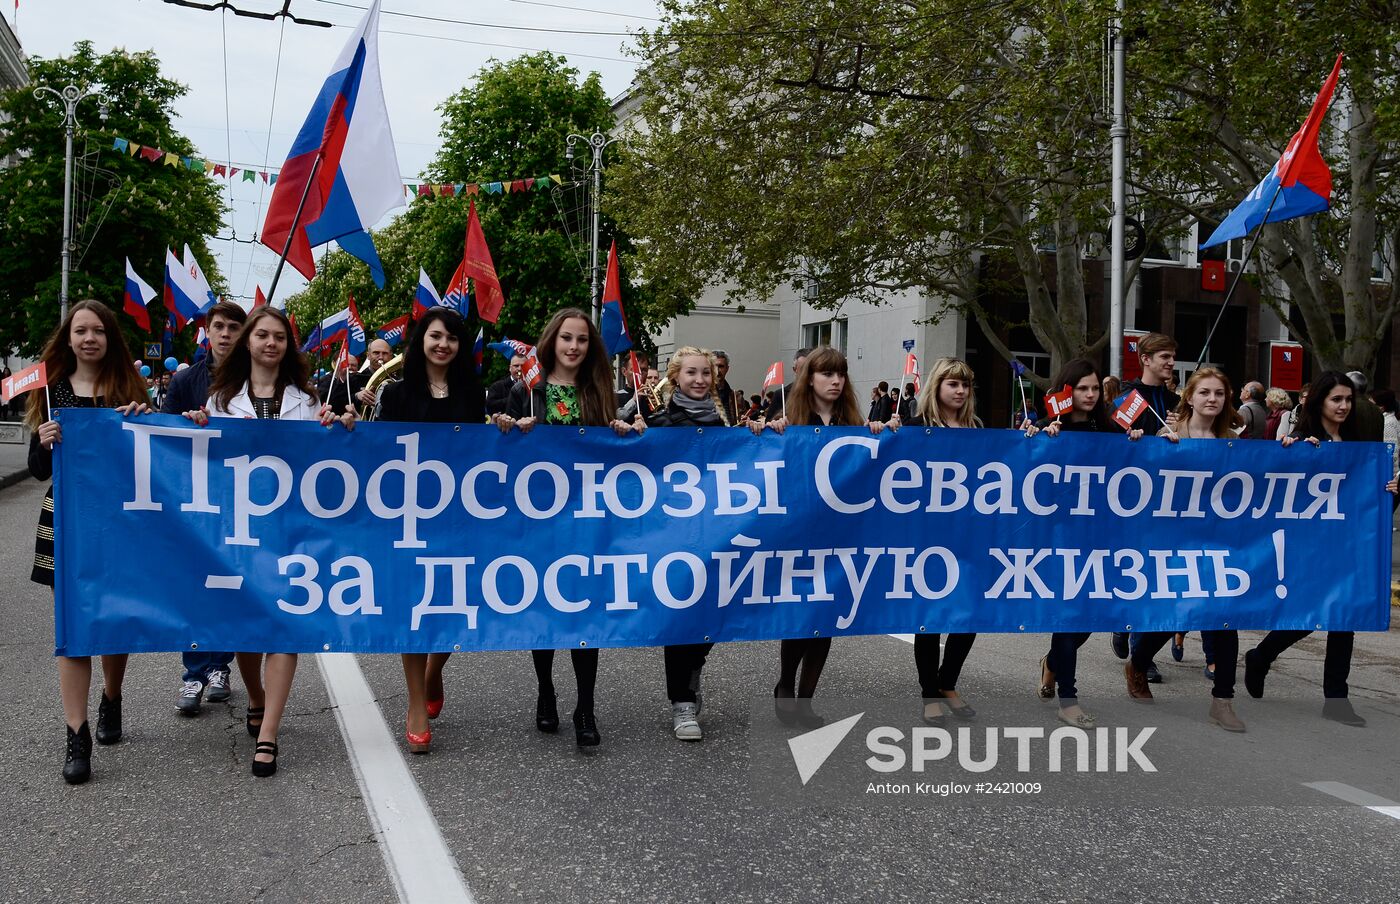 Spring and Labor Day in Crimea